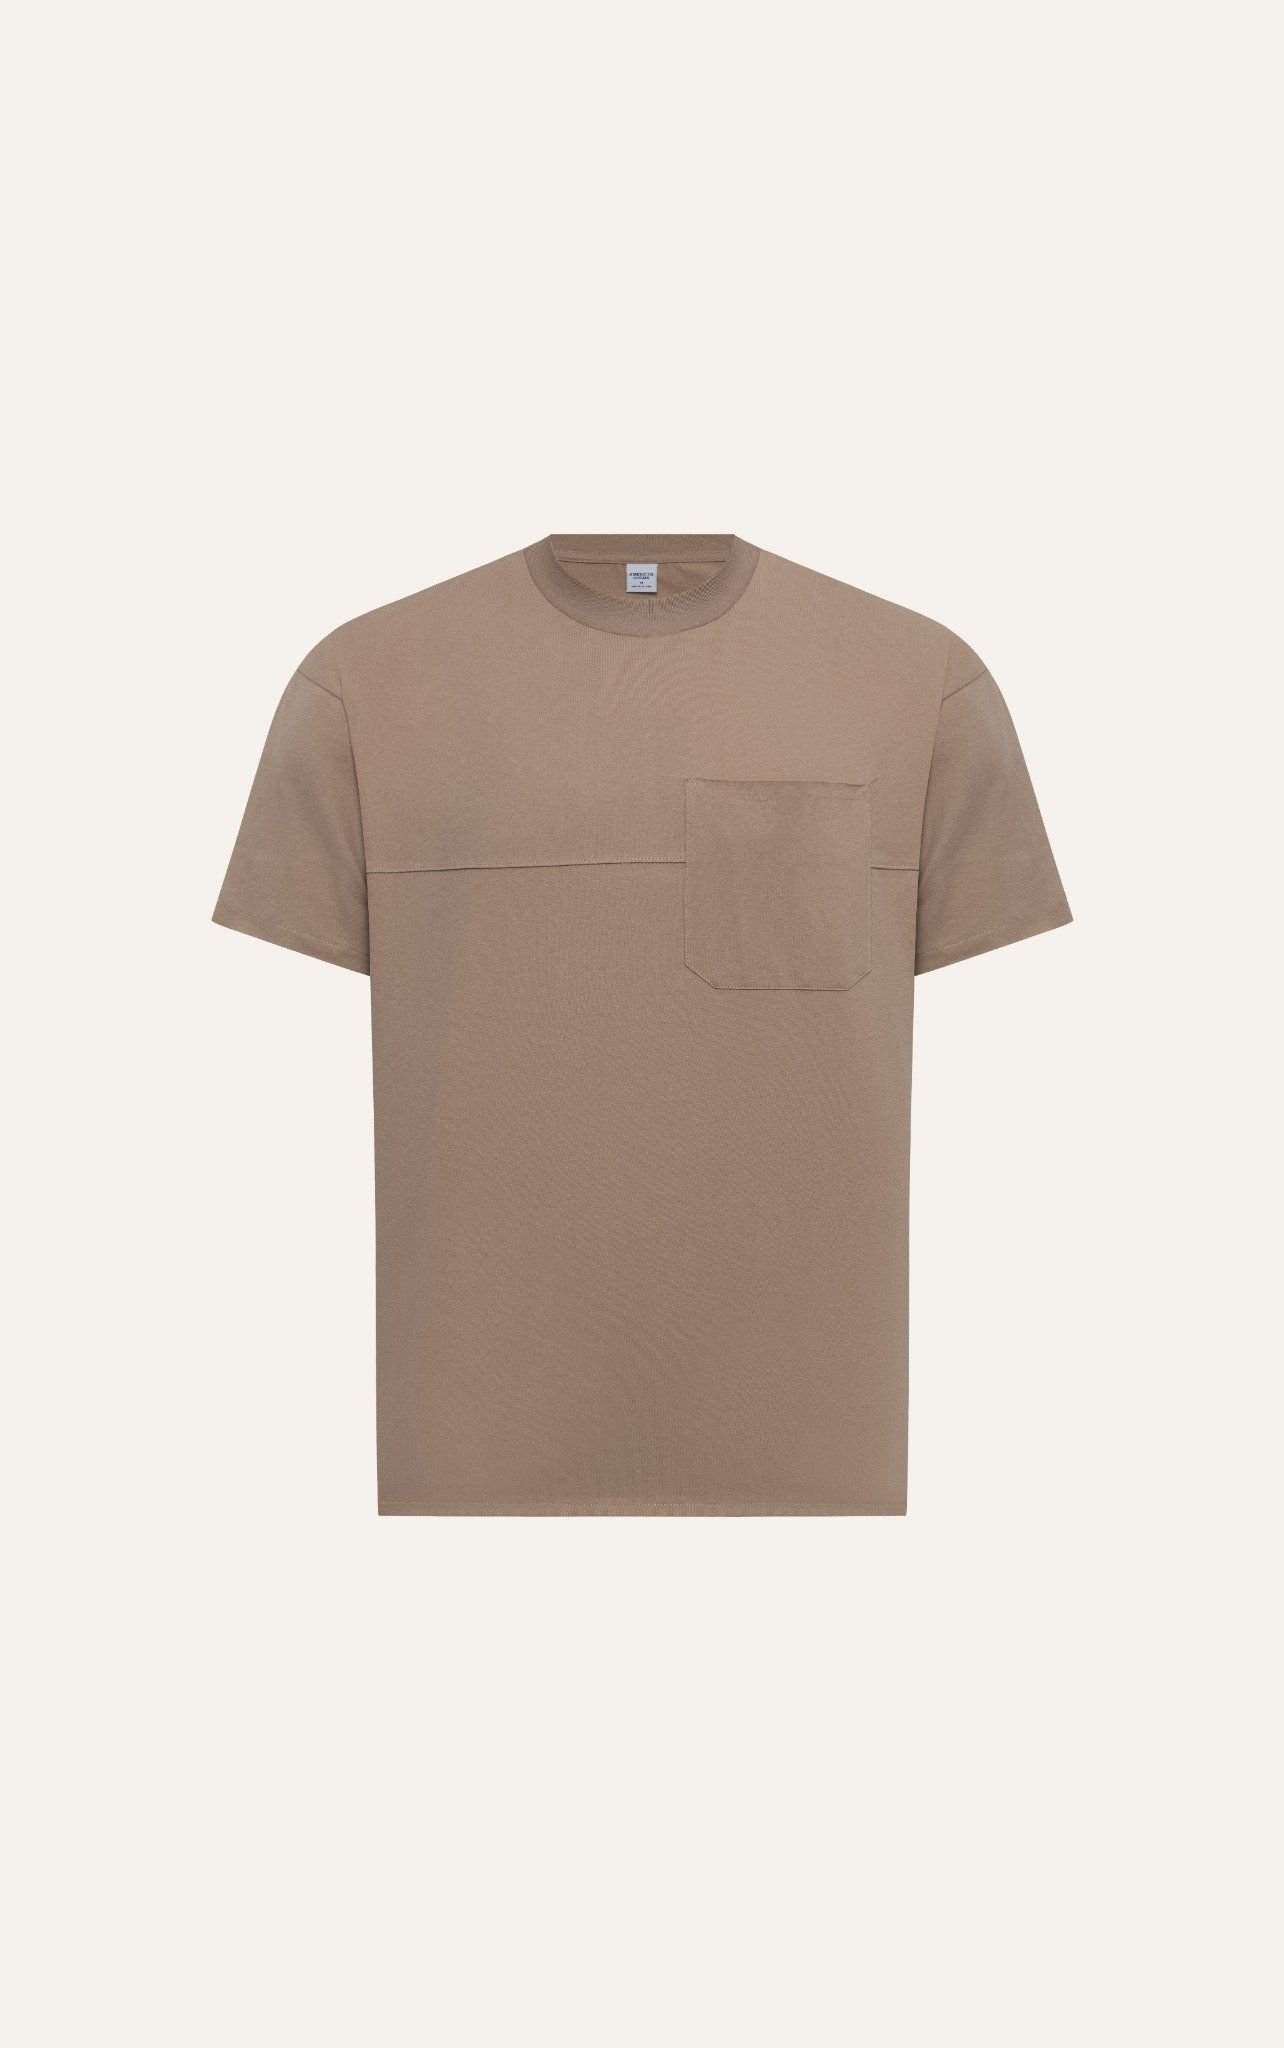  AG681 FACTORY OVERSIZE T-SHIRT WITH CHEST POCKET - BROWN 